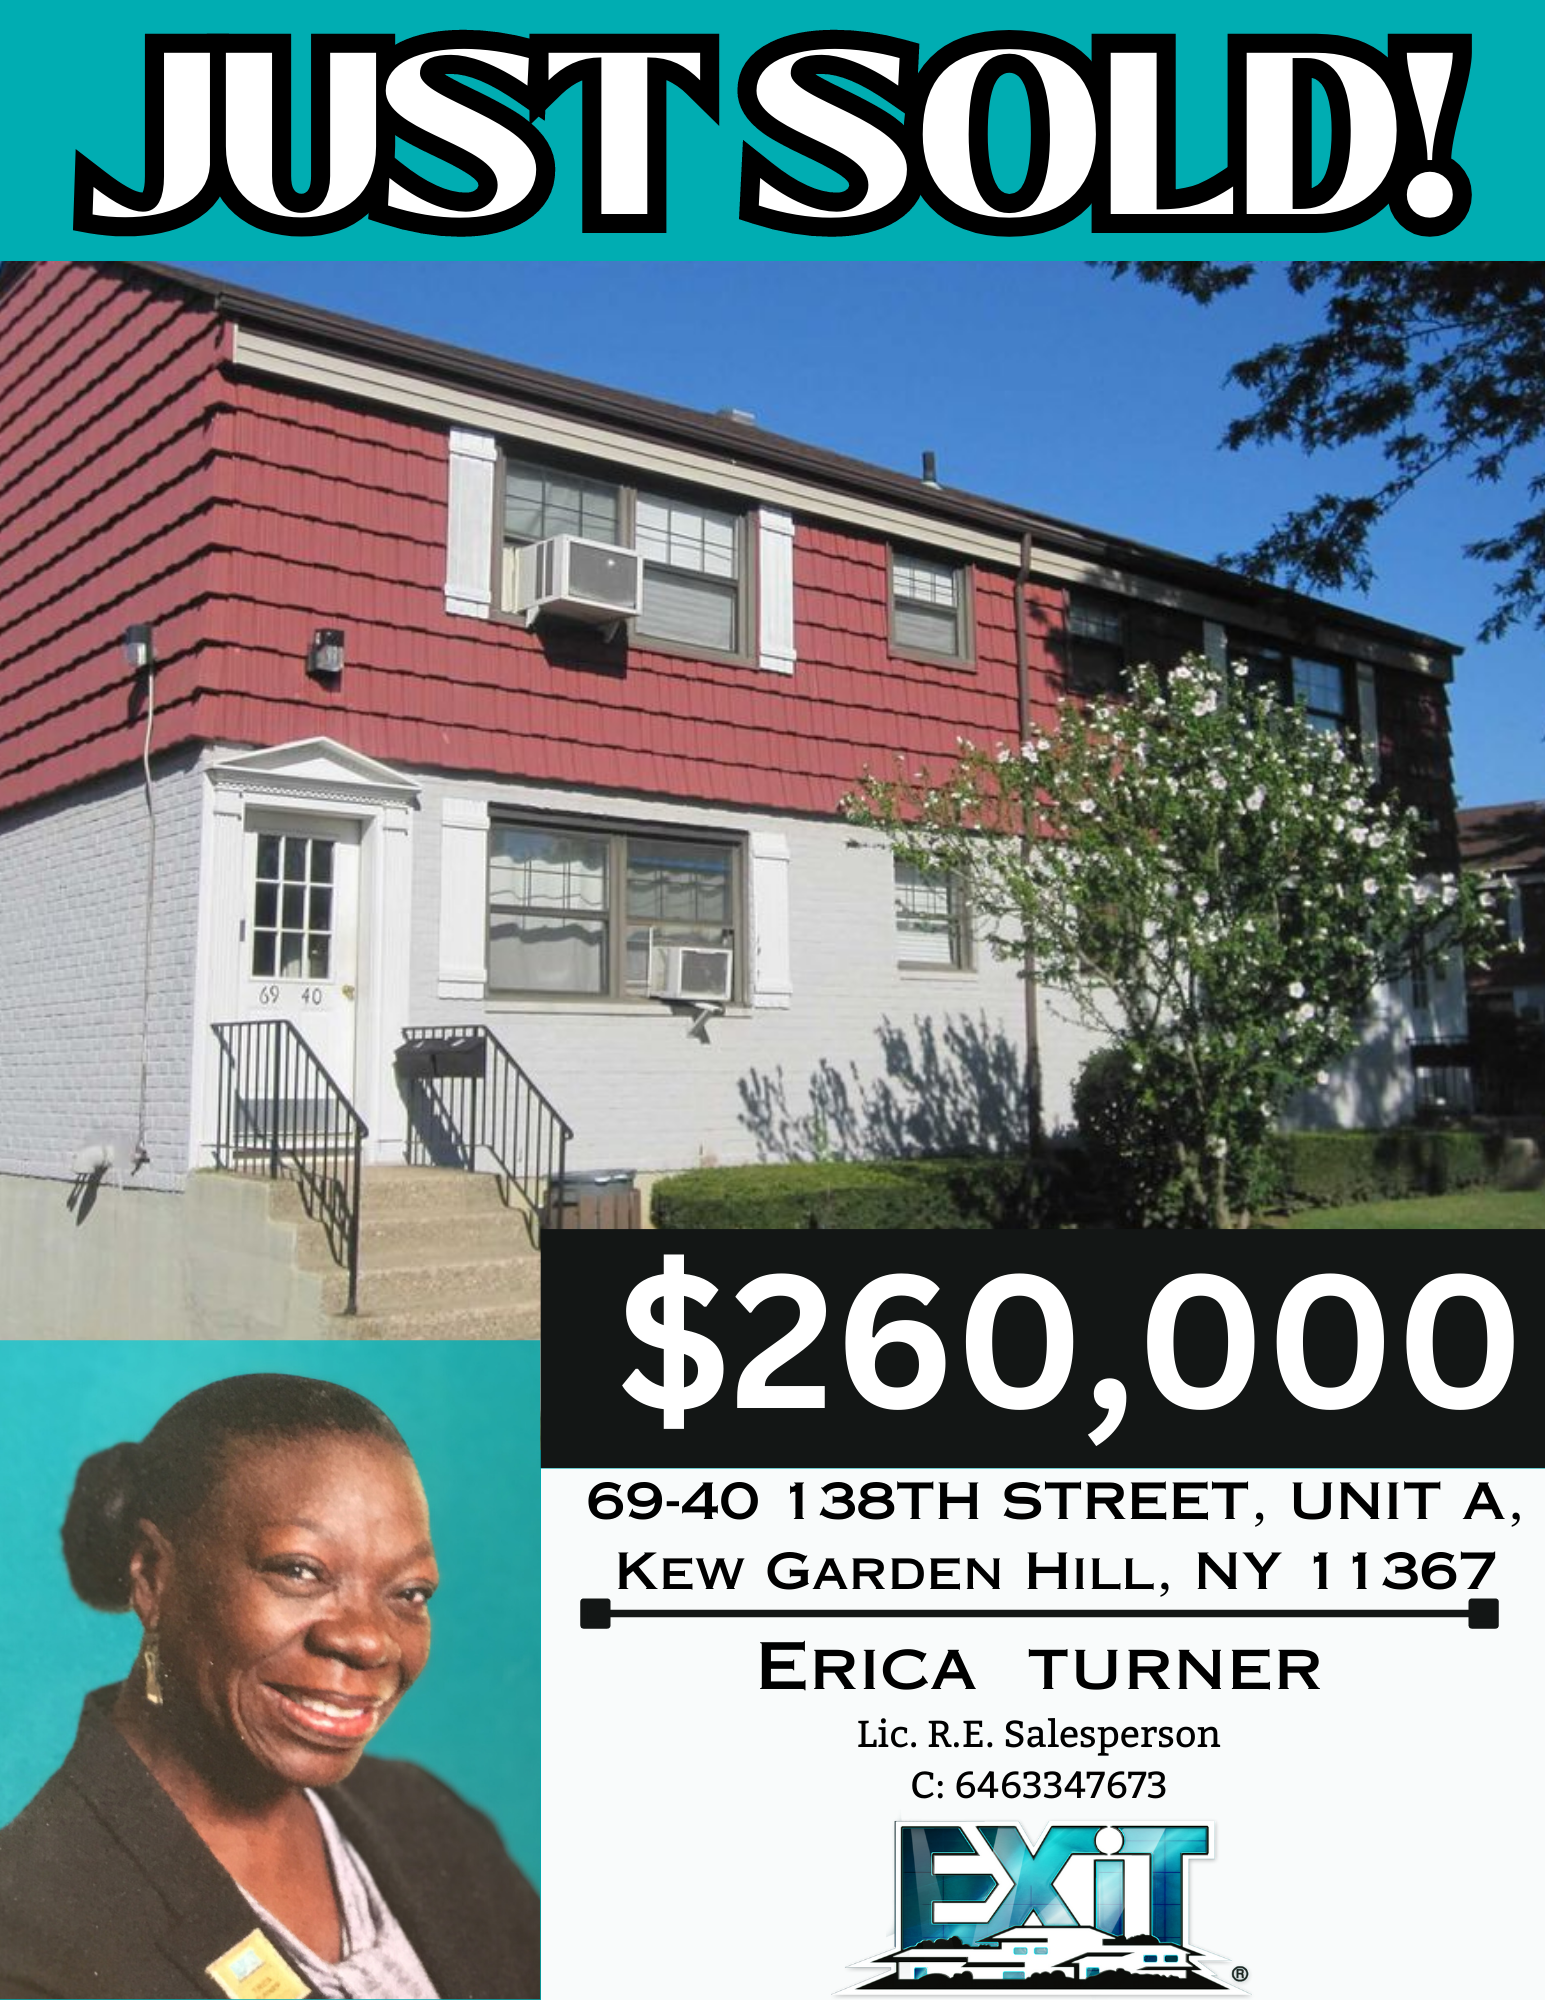 Just Sold by Erica Turner in Kew Garden Hill